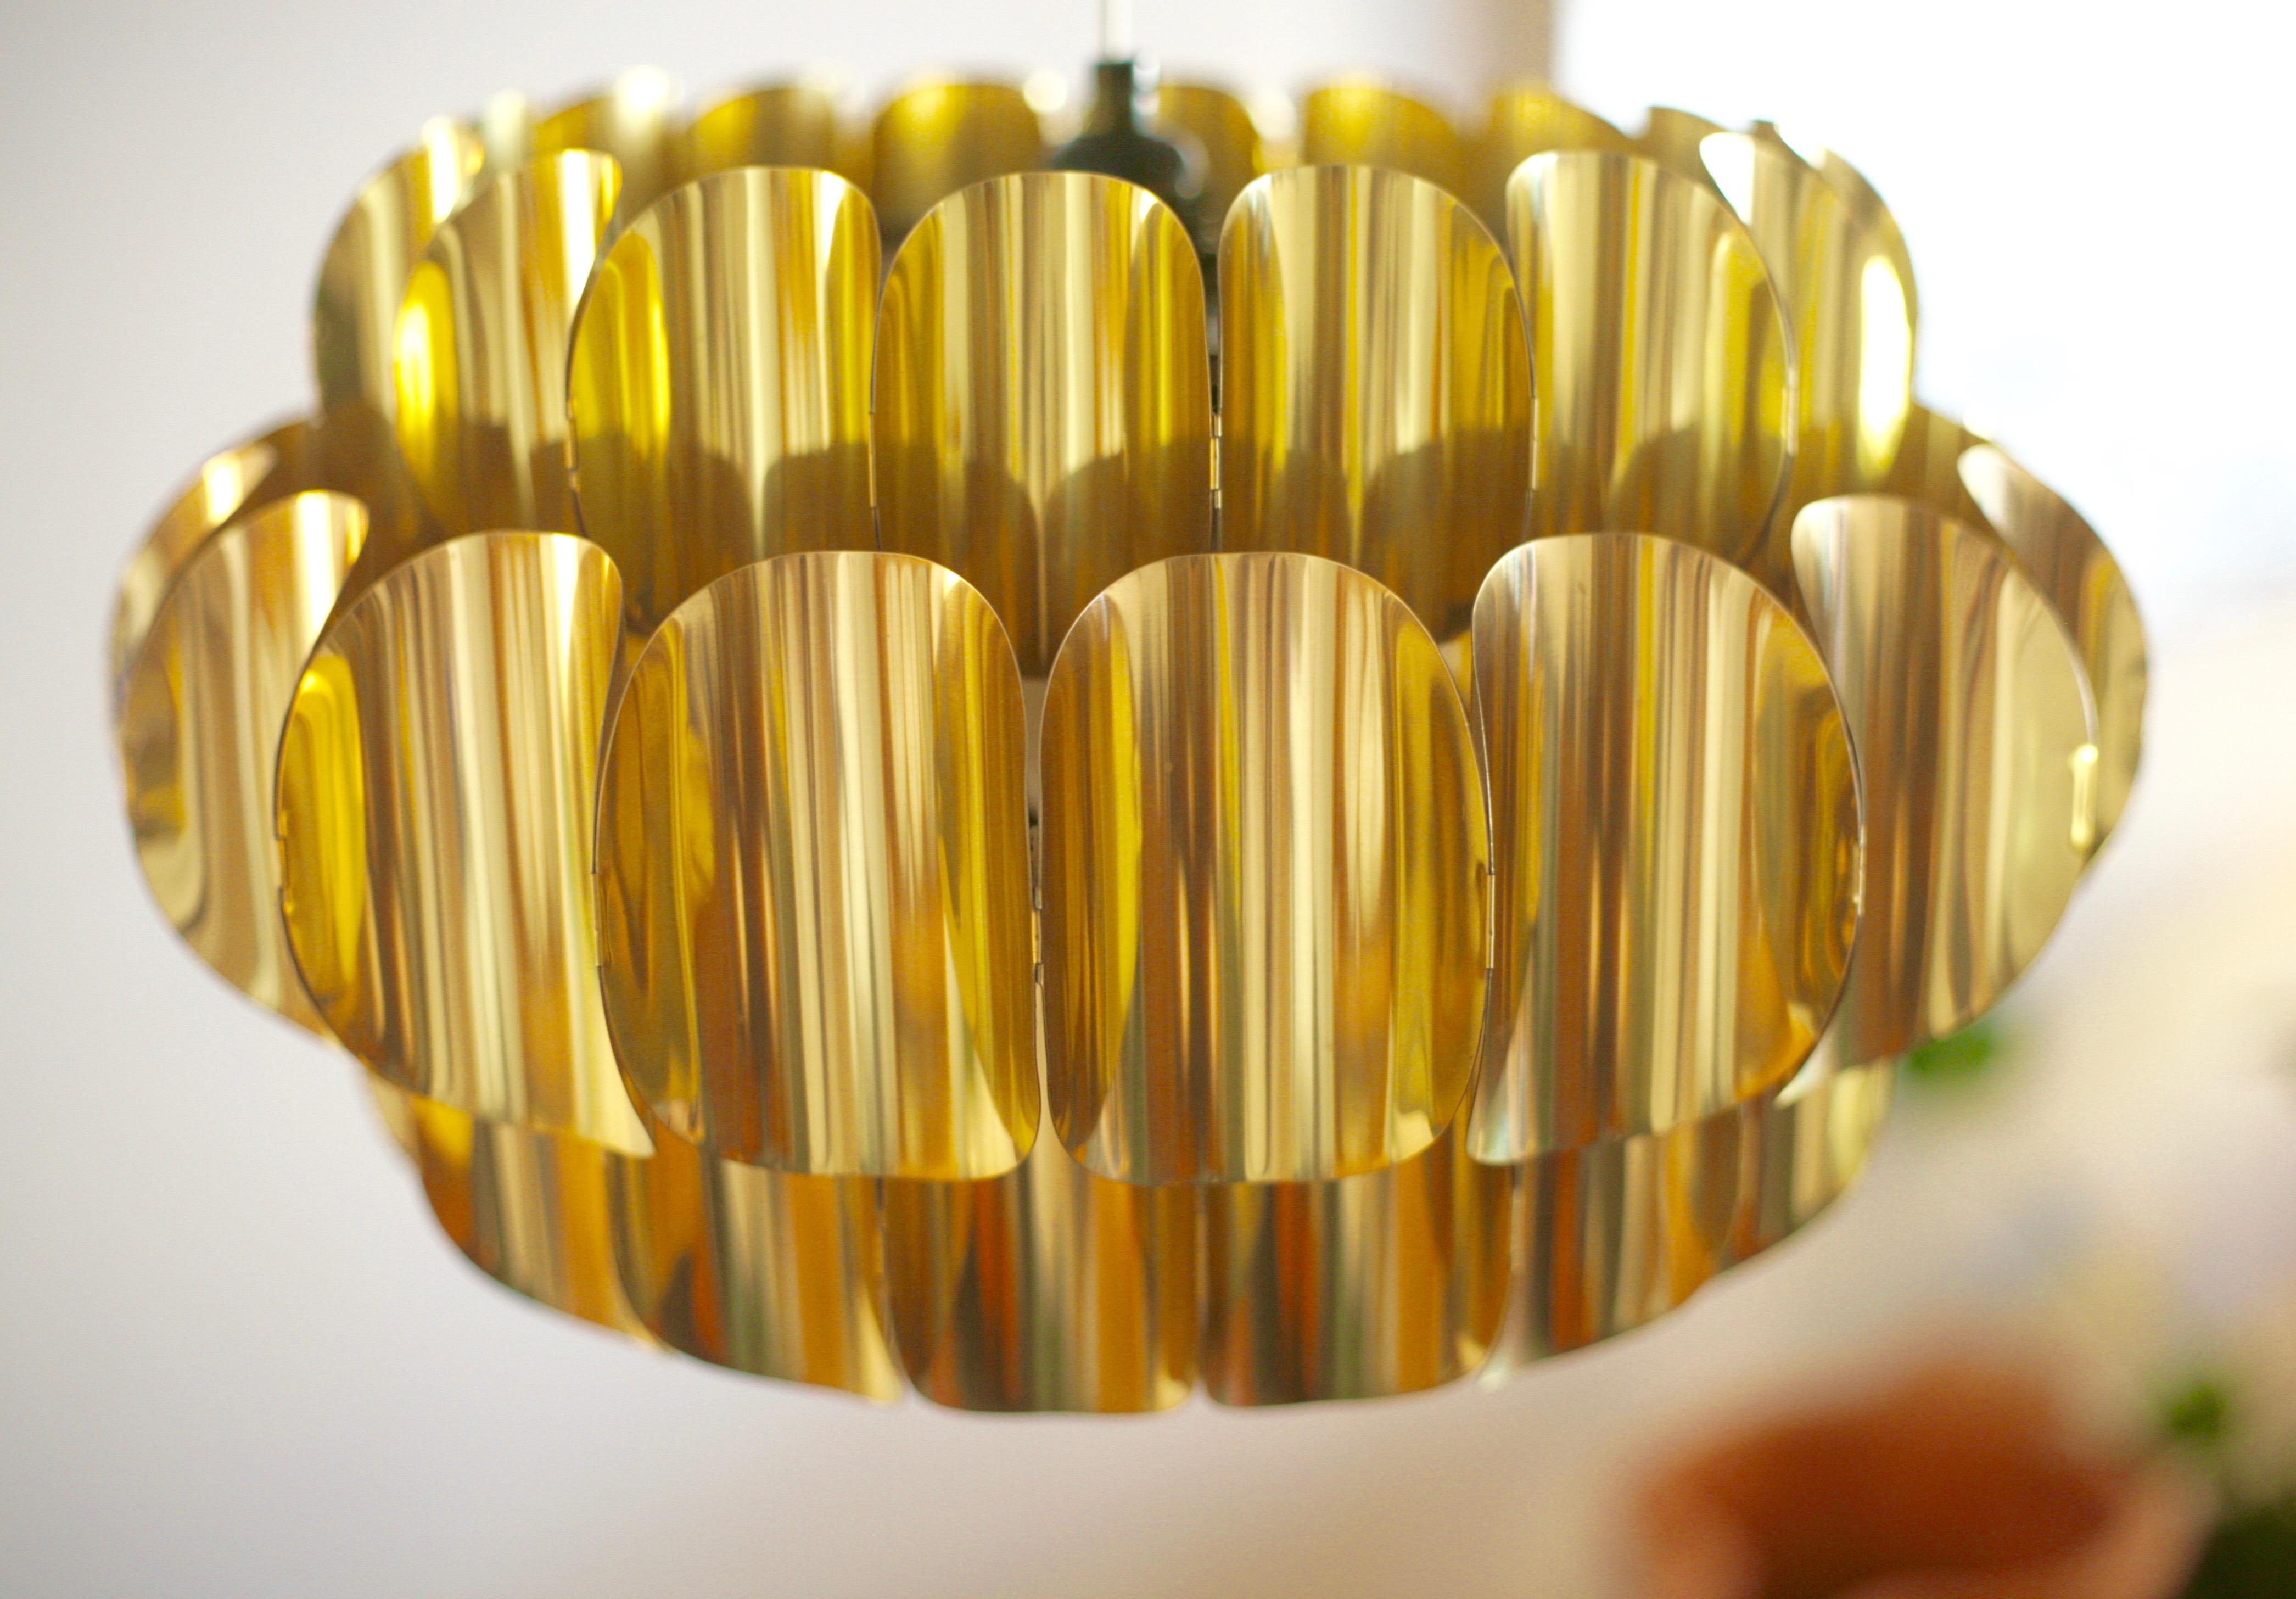 Modernist brass pendant designed by Werner Schou for Coronell Elektro in the early 1970s.